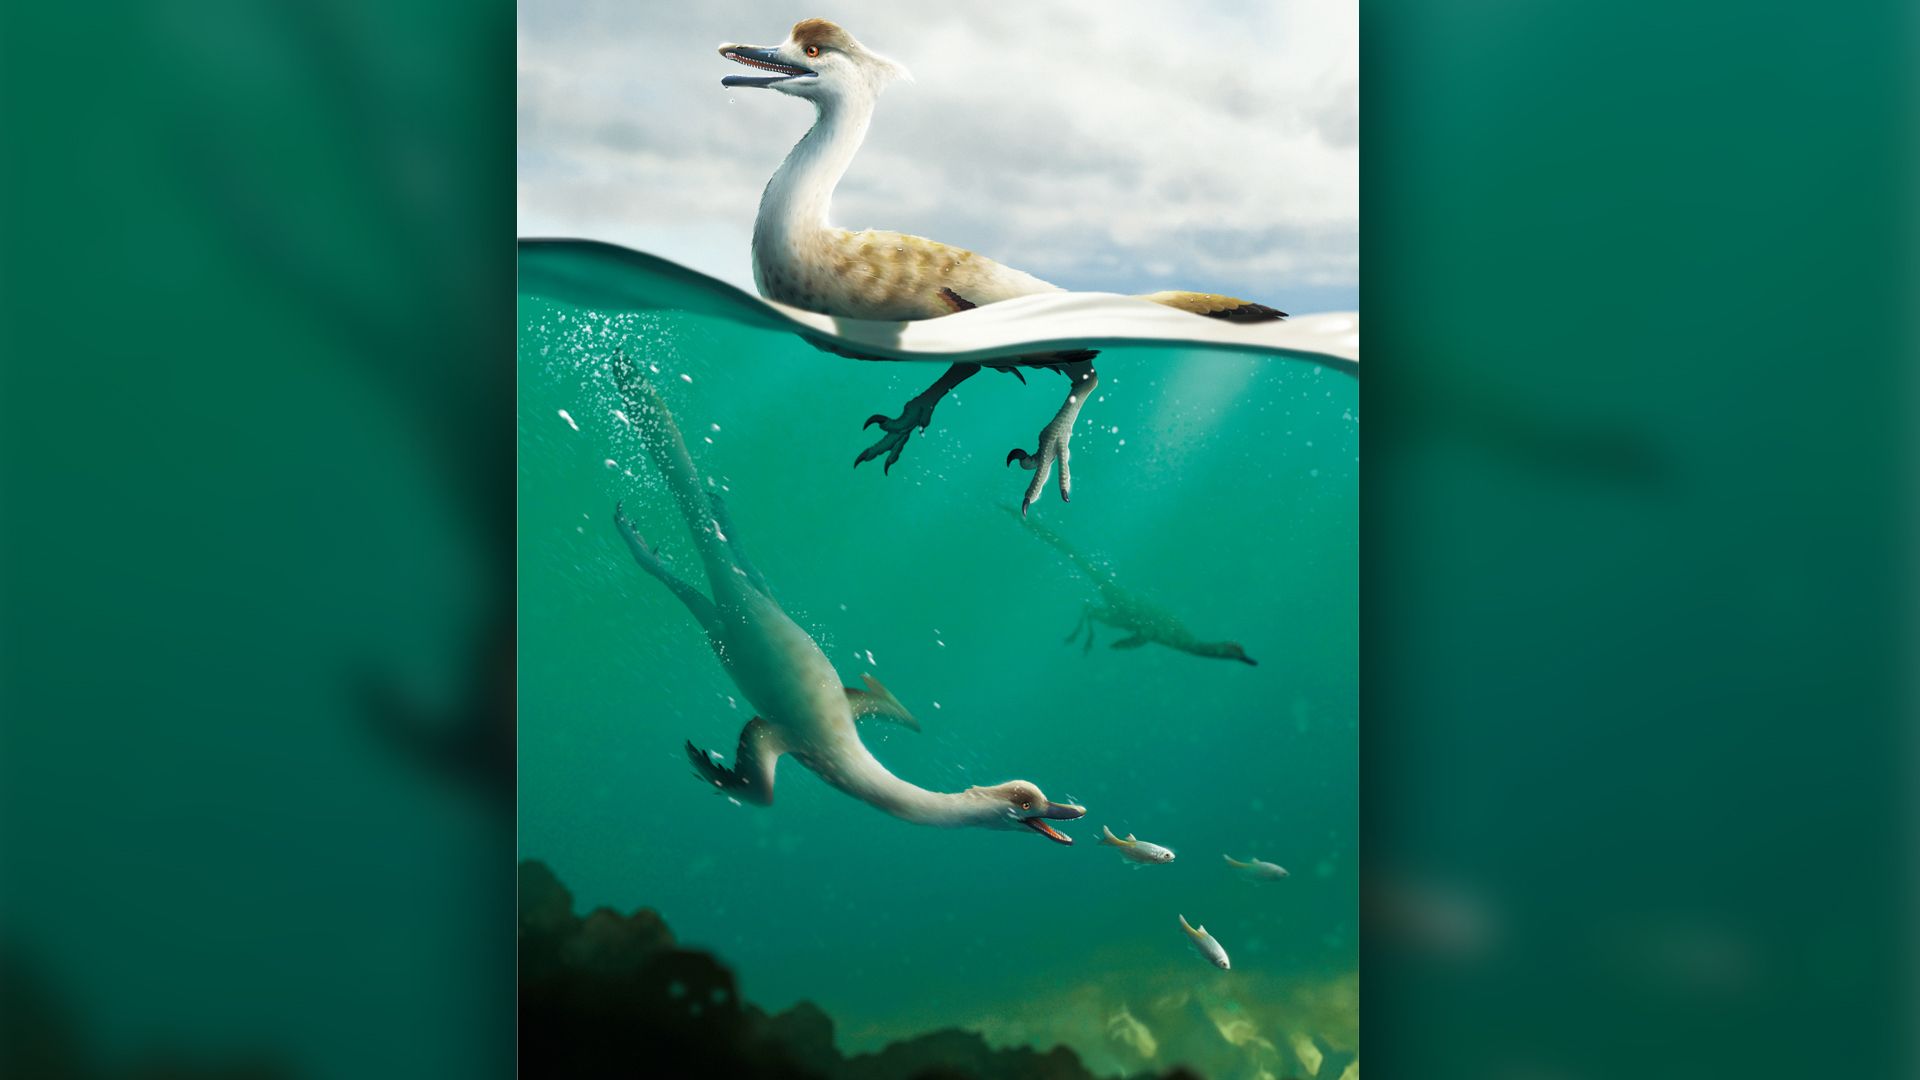 A New Species Of Dinosaur Might Have Dived Like A Duck To